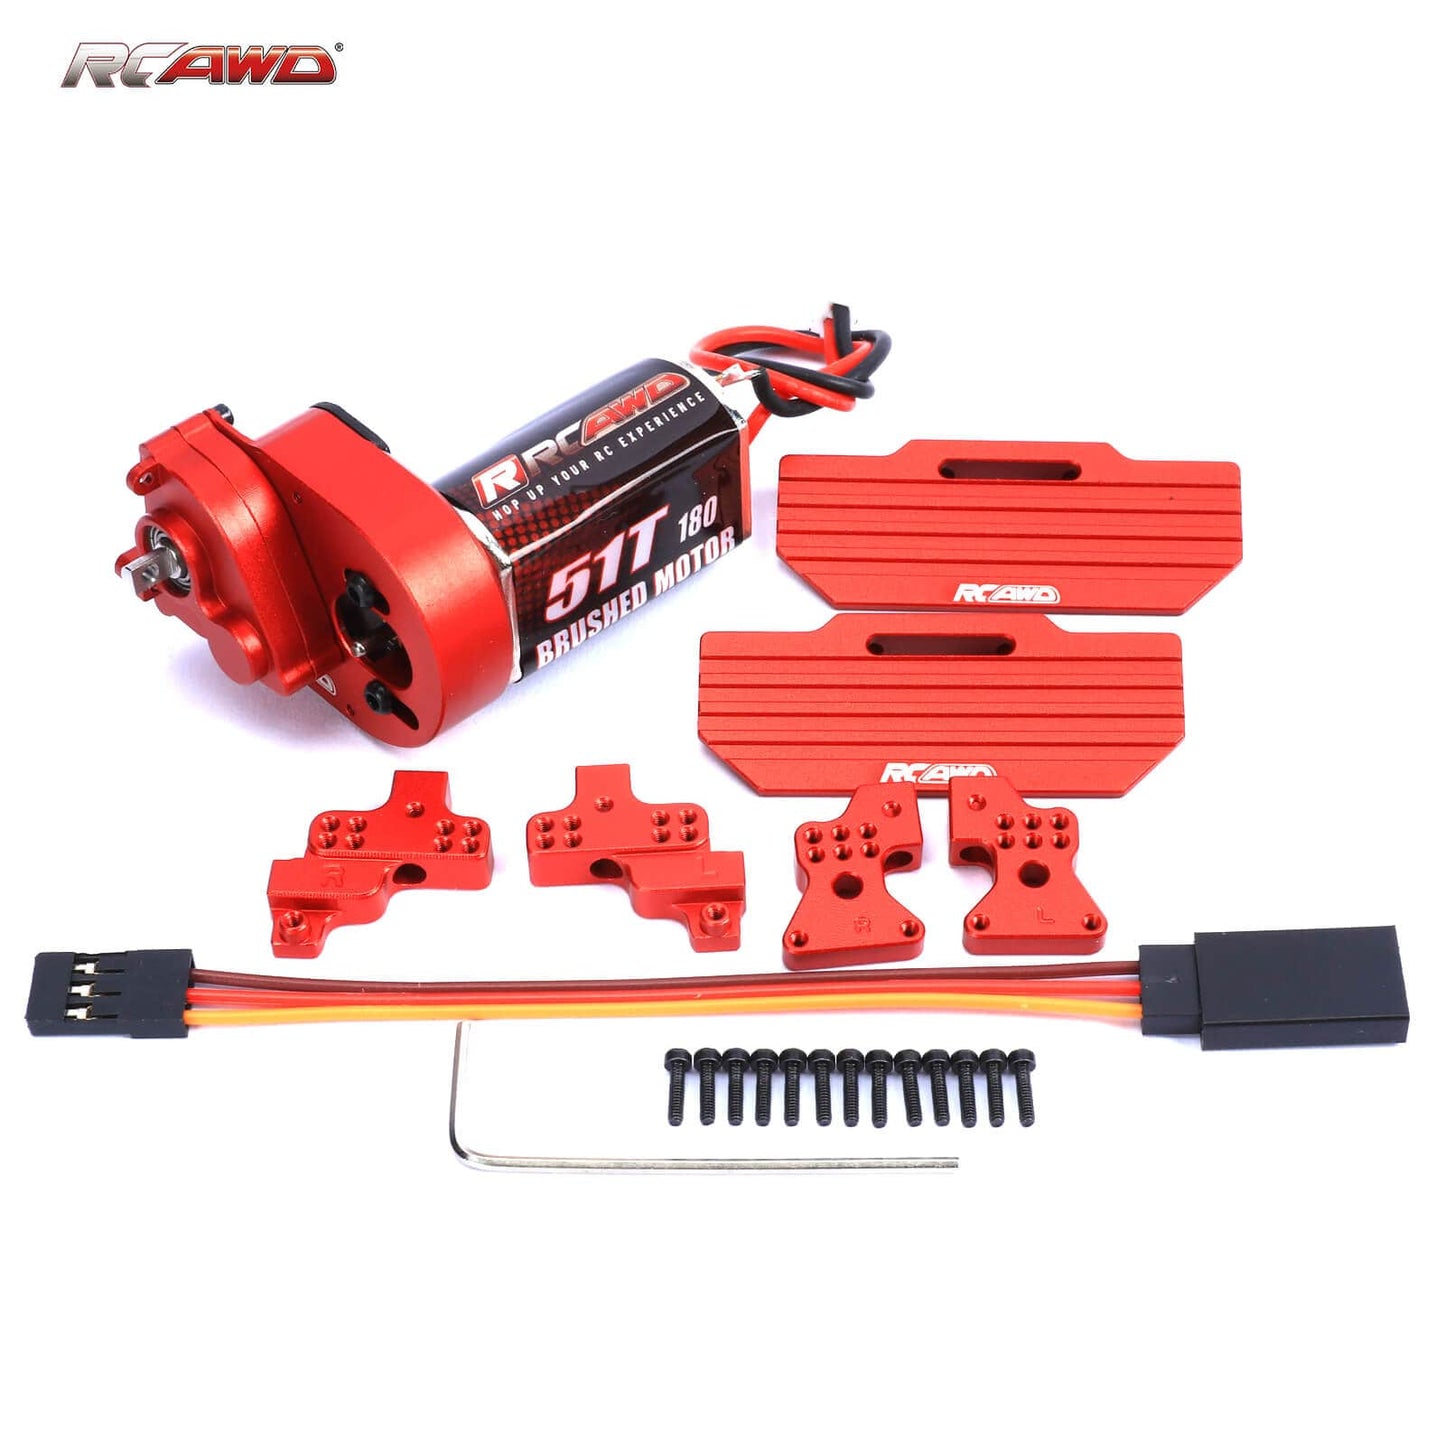 RCAWD AXIAL SCX24 RCAWD Axial SCX24 Upgrades 180 Motor 51t gearbox combo with Shock Tower and Skid Plate